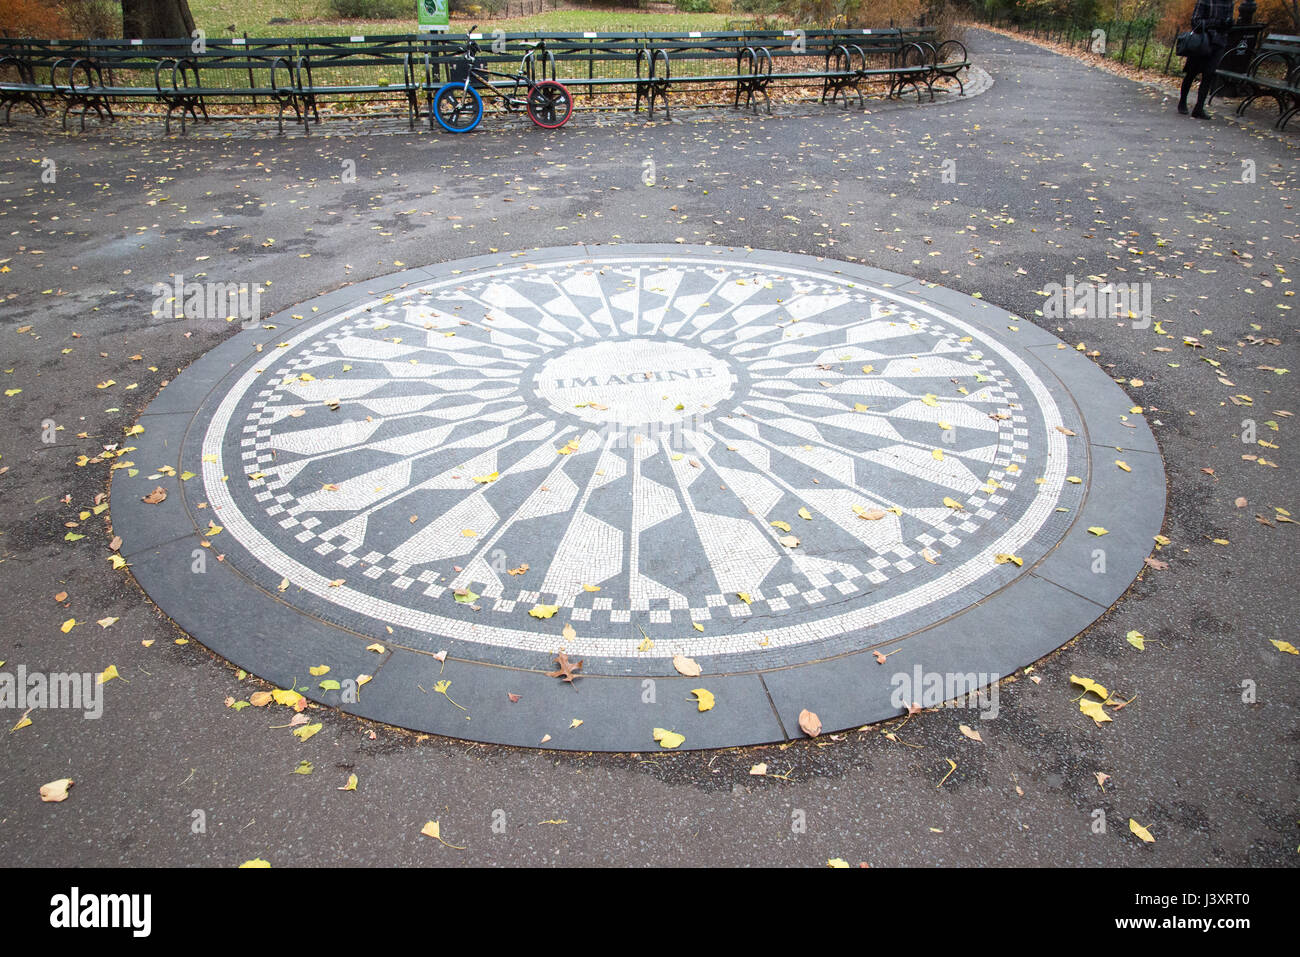 Immaginate, Strawberry Fields, Central Park Foto Stock